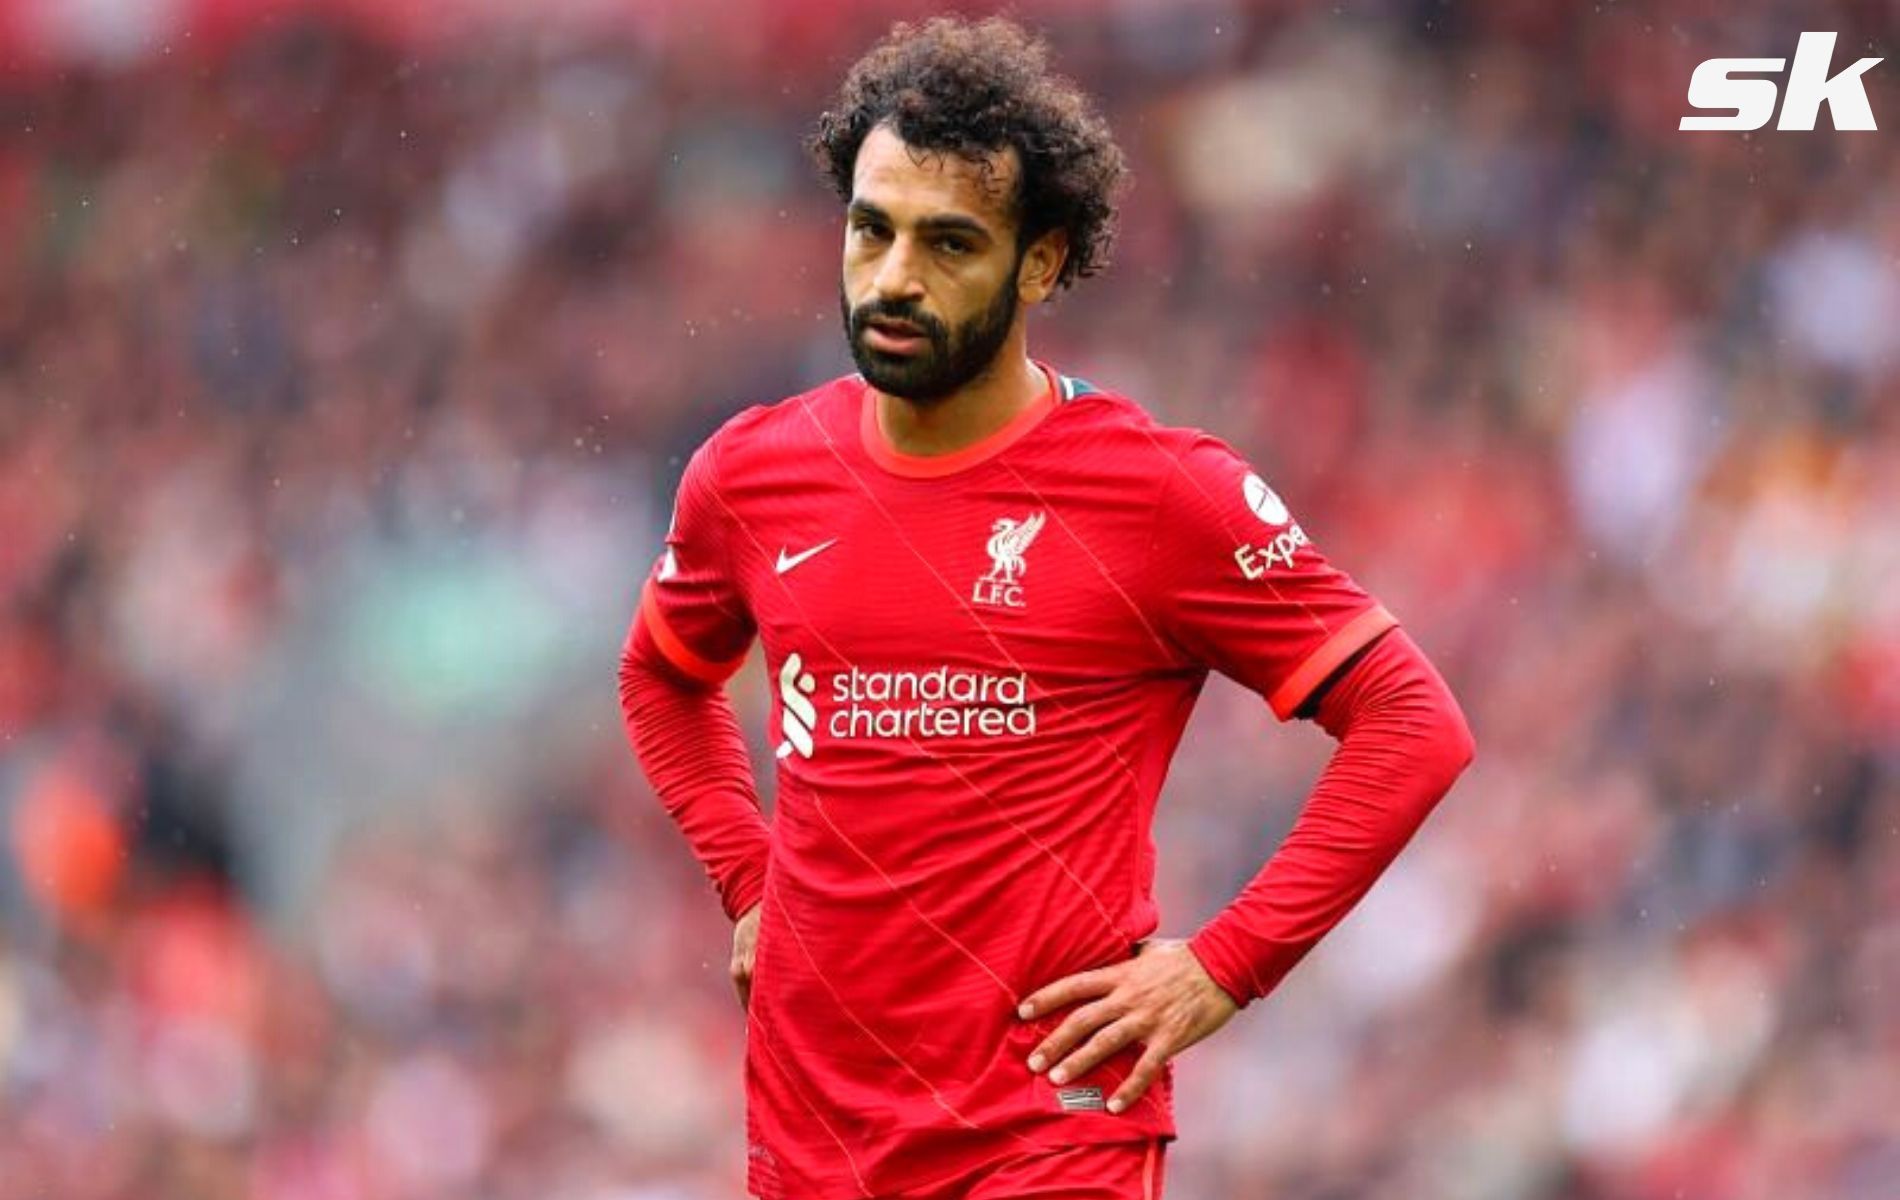 Mohamed Salah undoubtedly deserved to be in the 23-man FIFPRO World XI shortlist